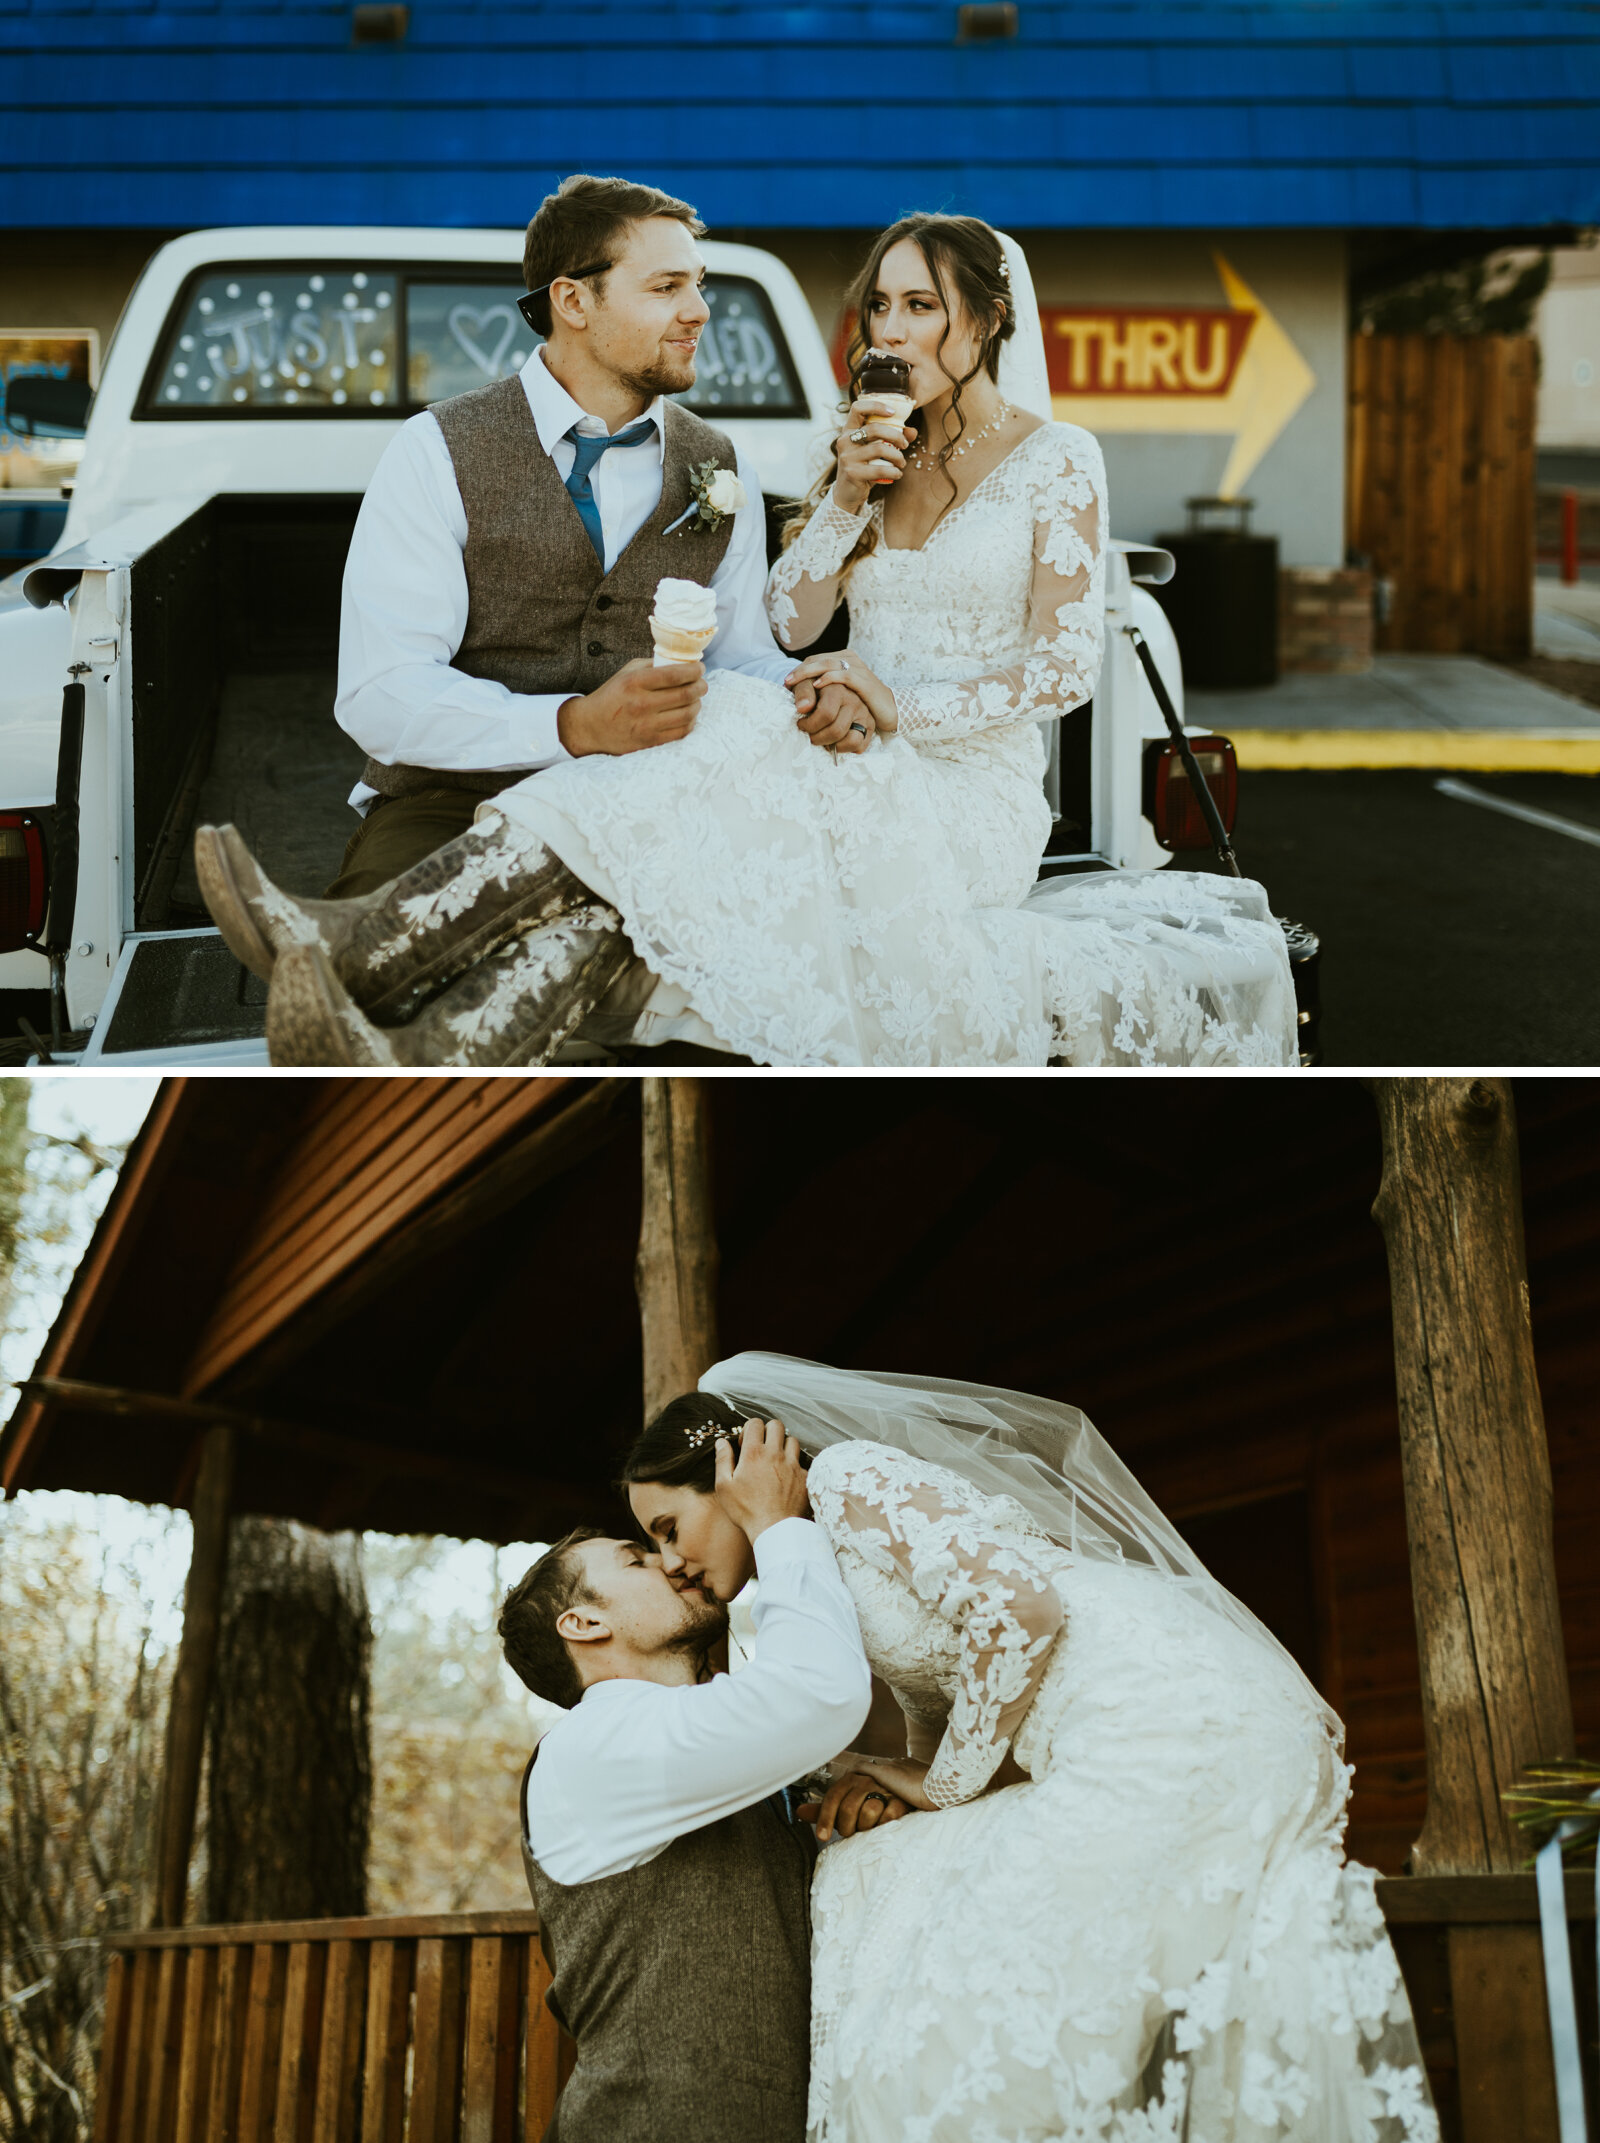 Flagstaff Arizona wedding featuring a country bride. Hair and makeup inspiration for brides. .jpg